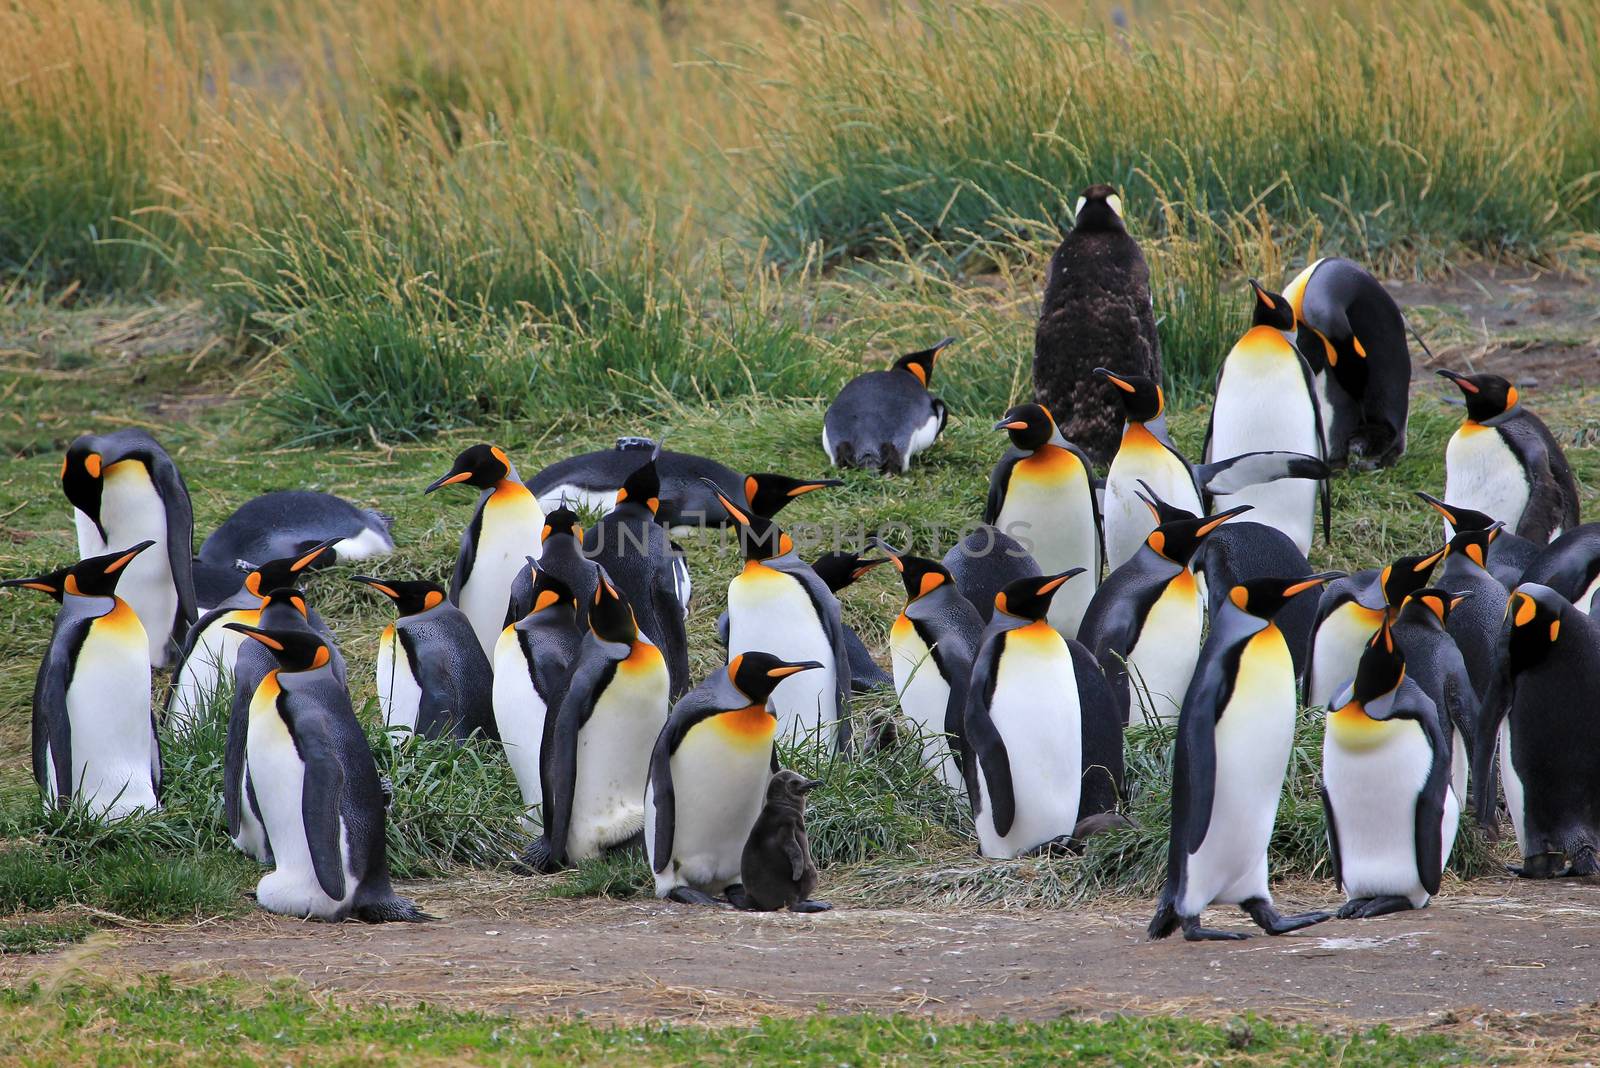 King penguins living wild at Parque Pinguino Rey, Patagonia, Chile by cicloco